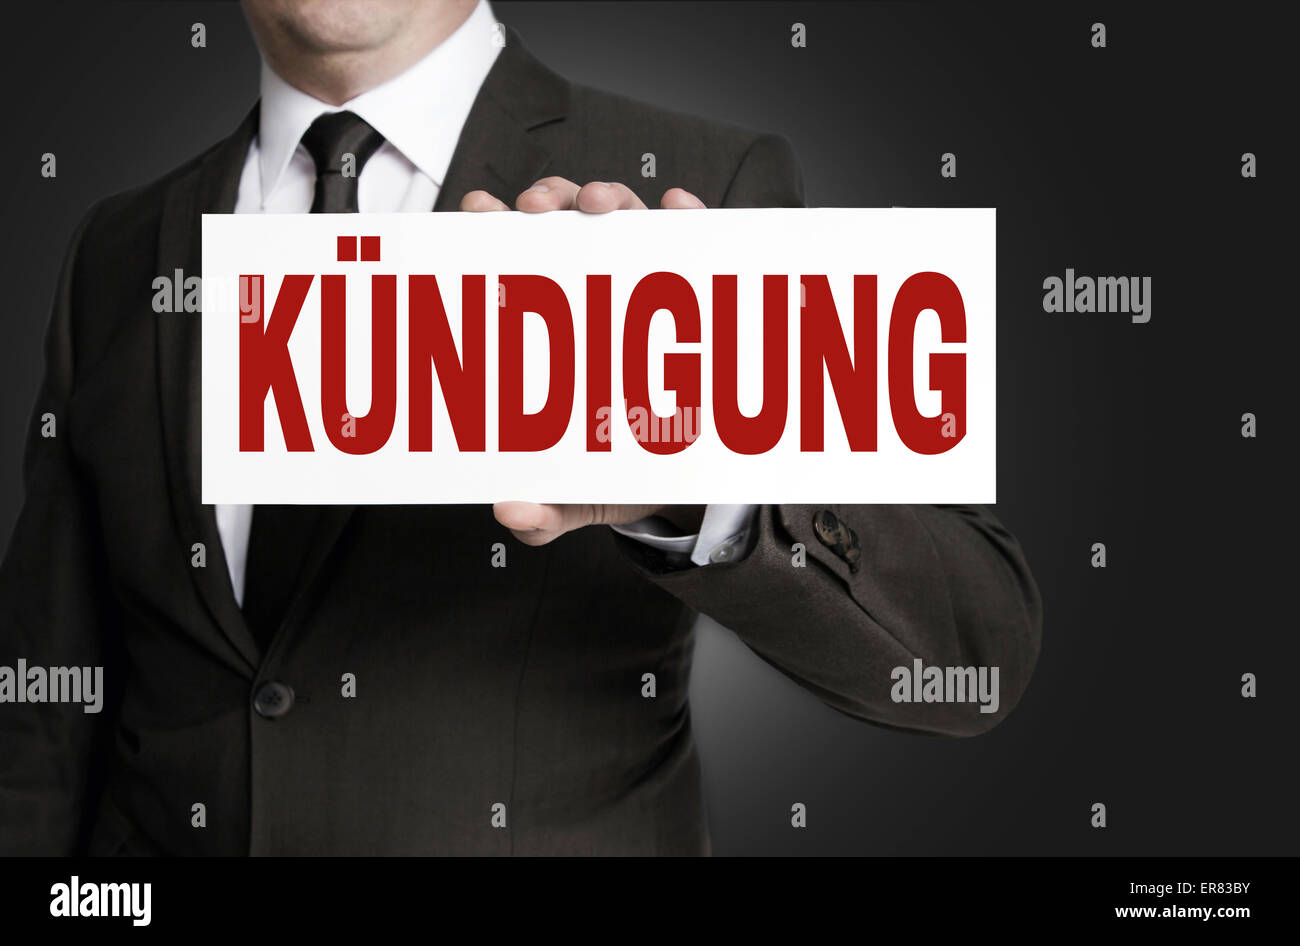 termination sign held by businessman Stock Photo